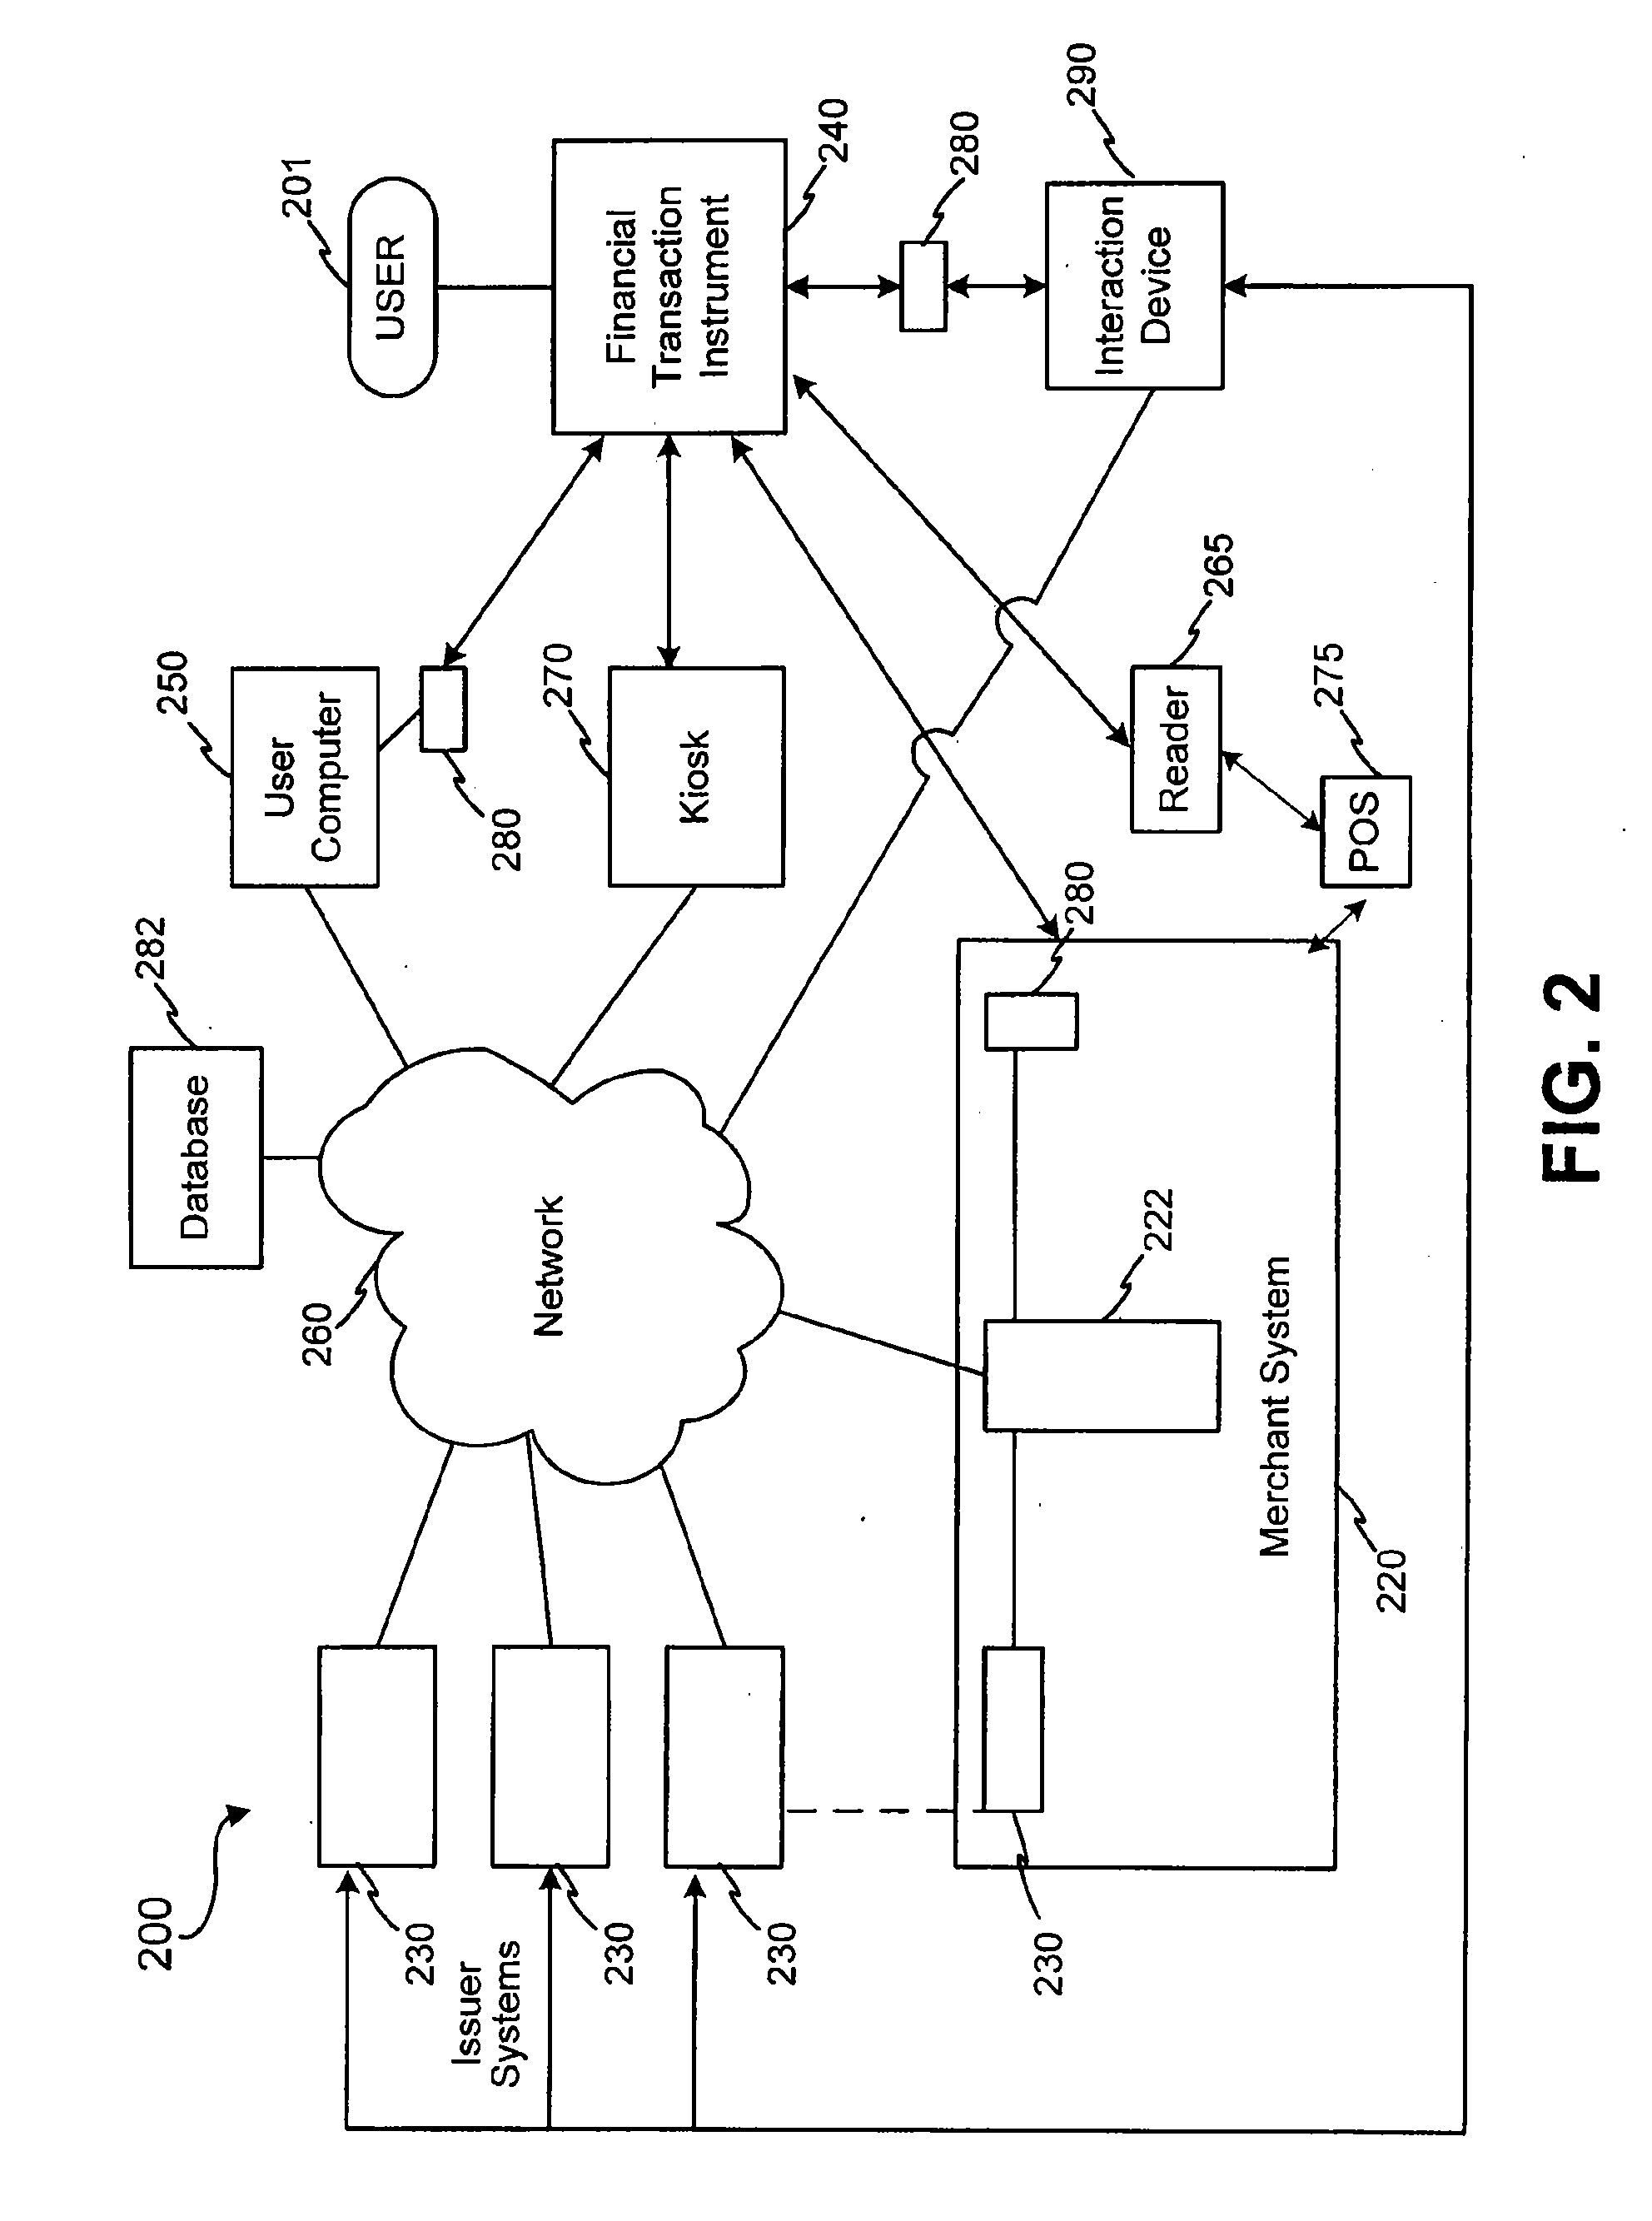 Systems and methods for non-traditional payment using biometric data